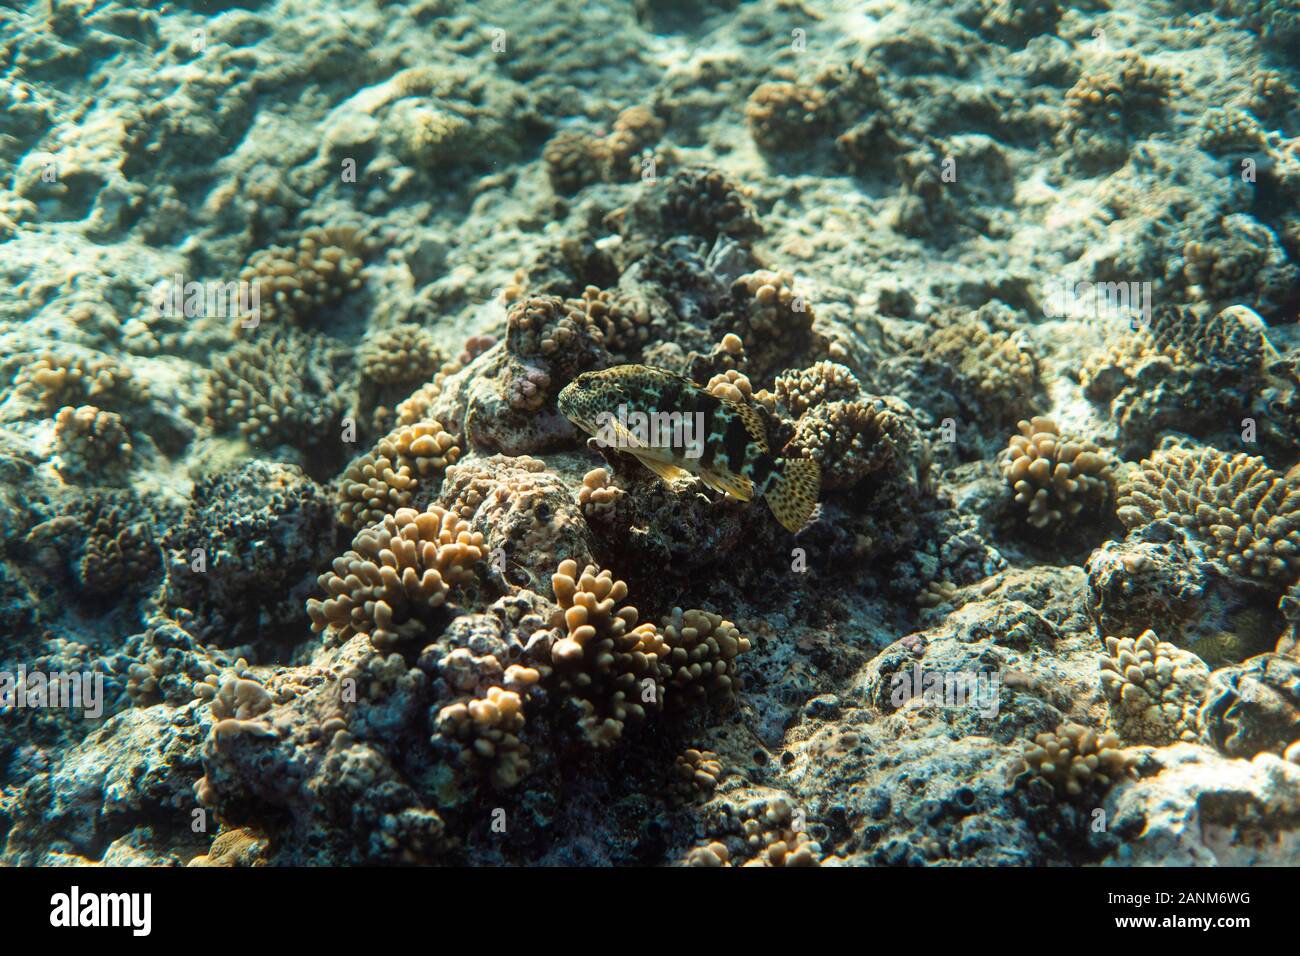 fish on a coral reef, underwater photography image, snorkeling in the ocean of egypt Stock Photo